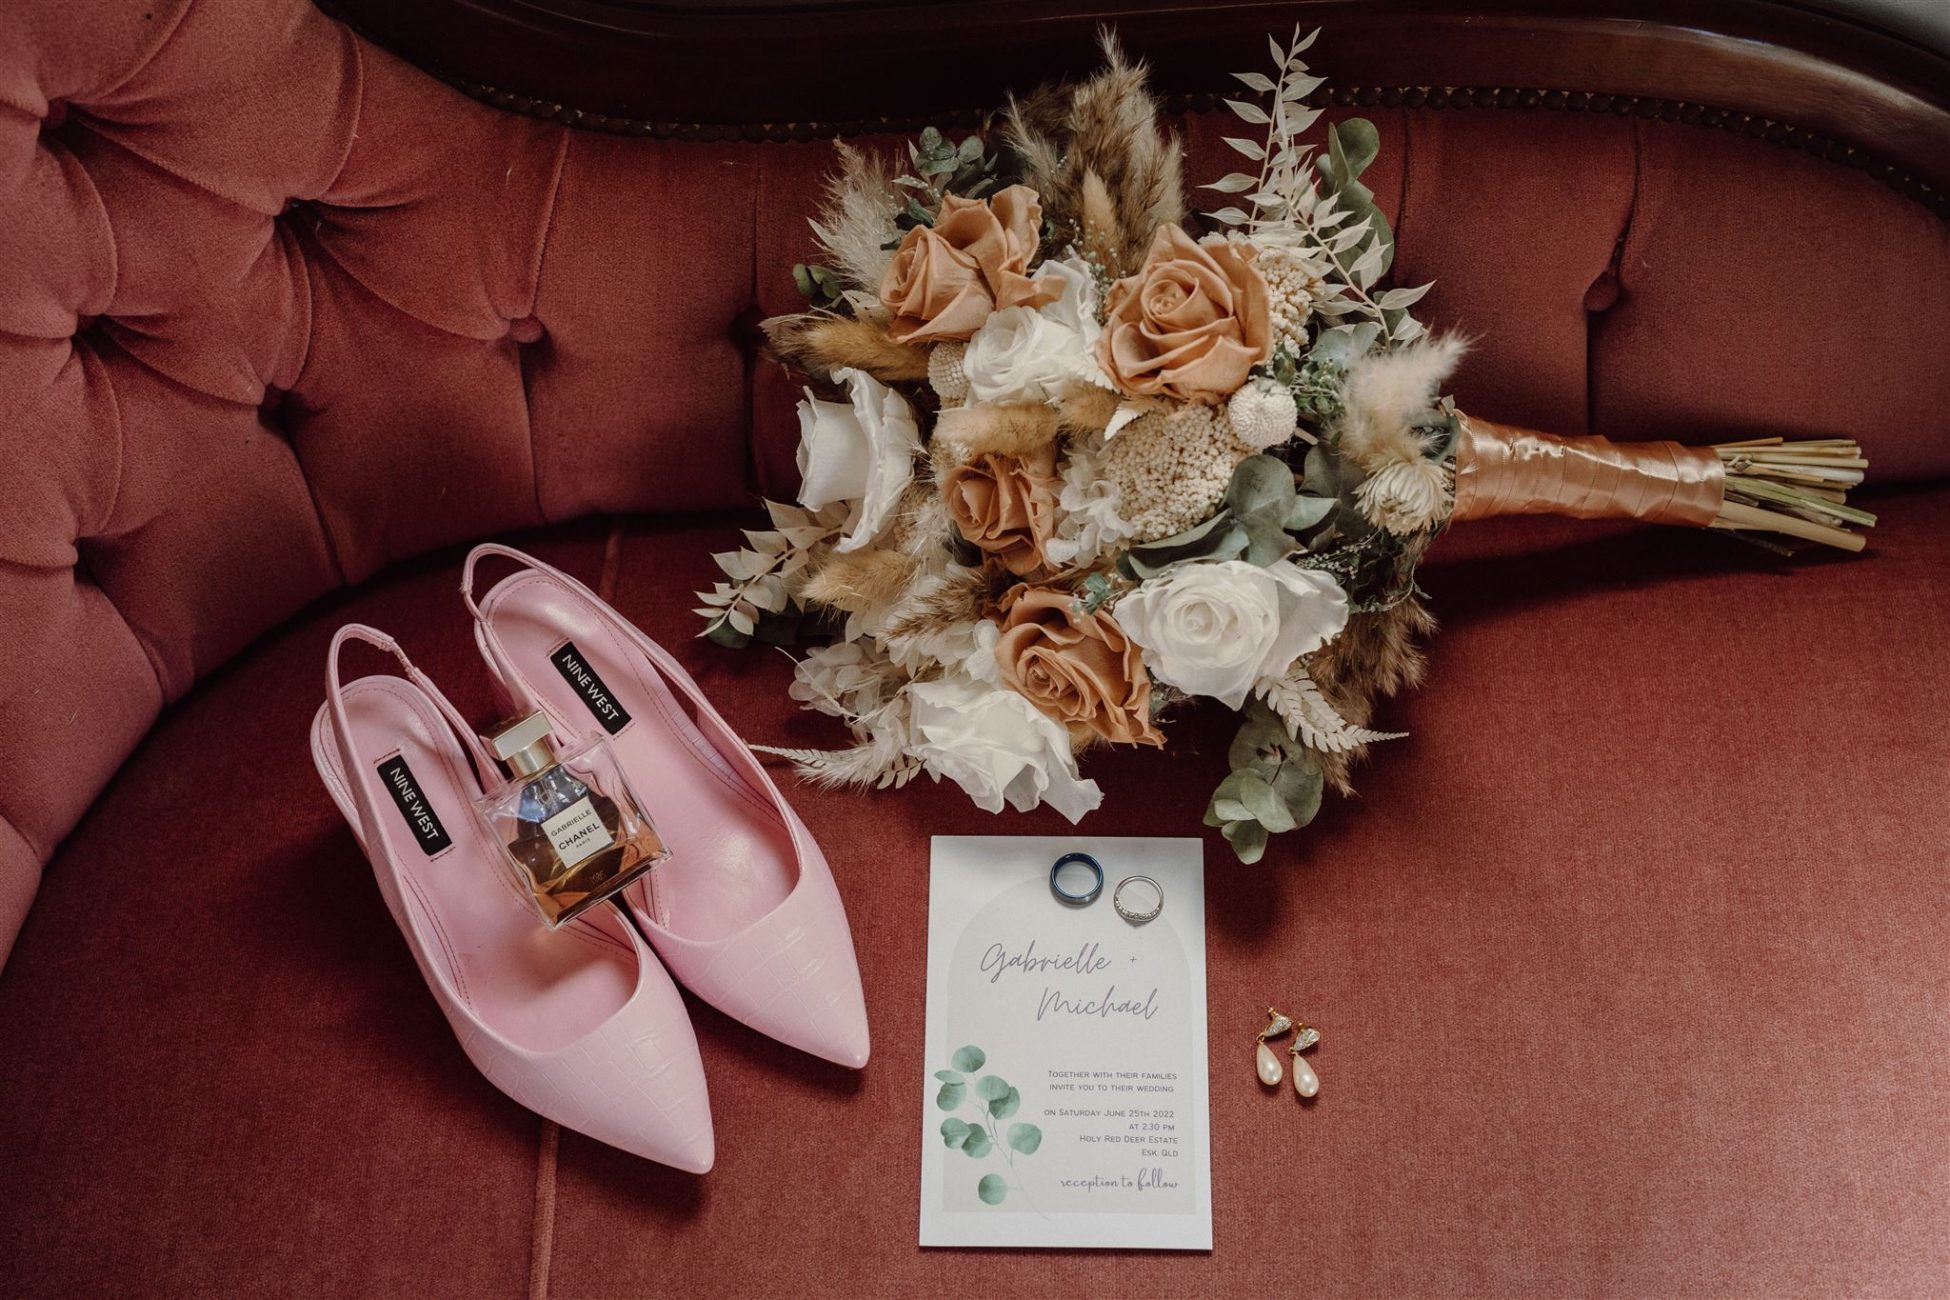 Bridal flowers, shoes and bouquet on red chesterfield couch